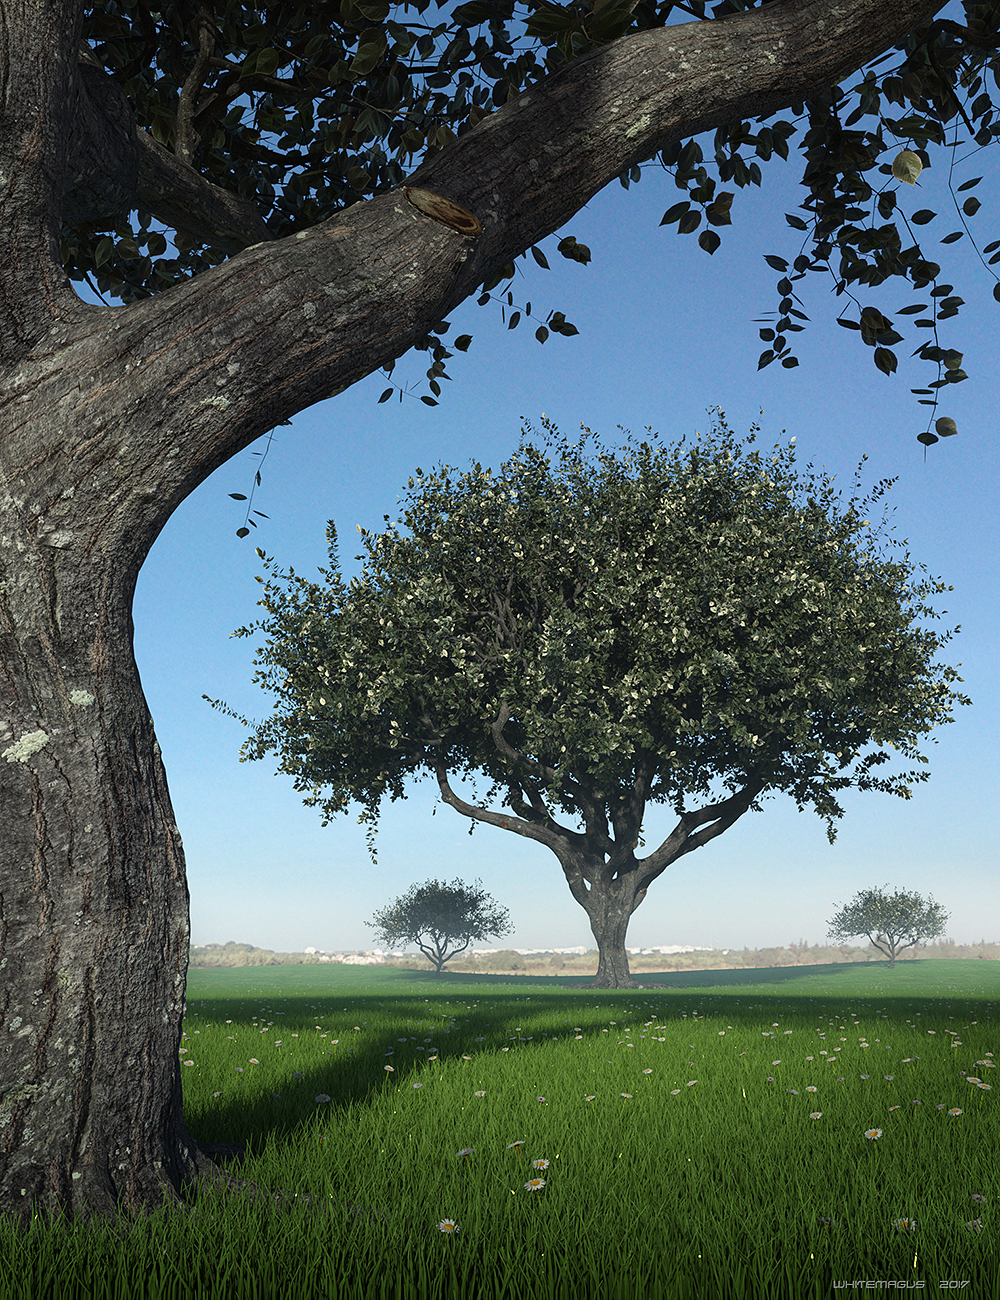 Hybrid Trees - Pruned by: Whitemagus, 3D Models by Daz 3D